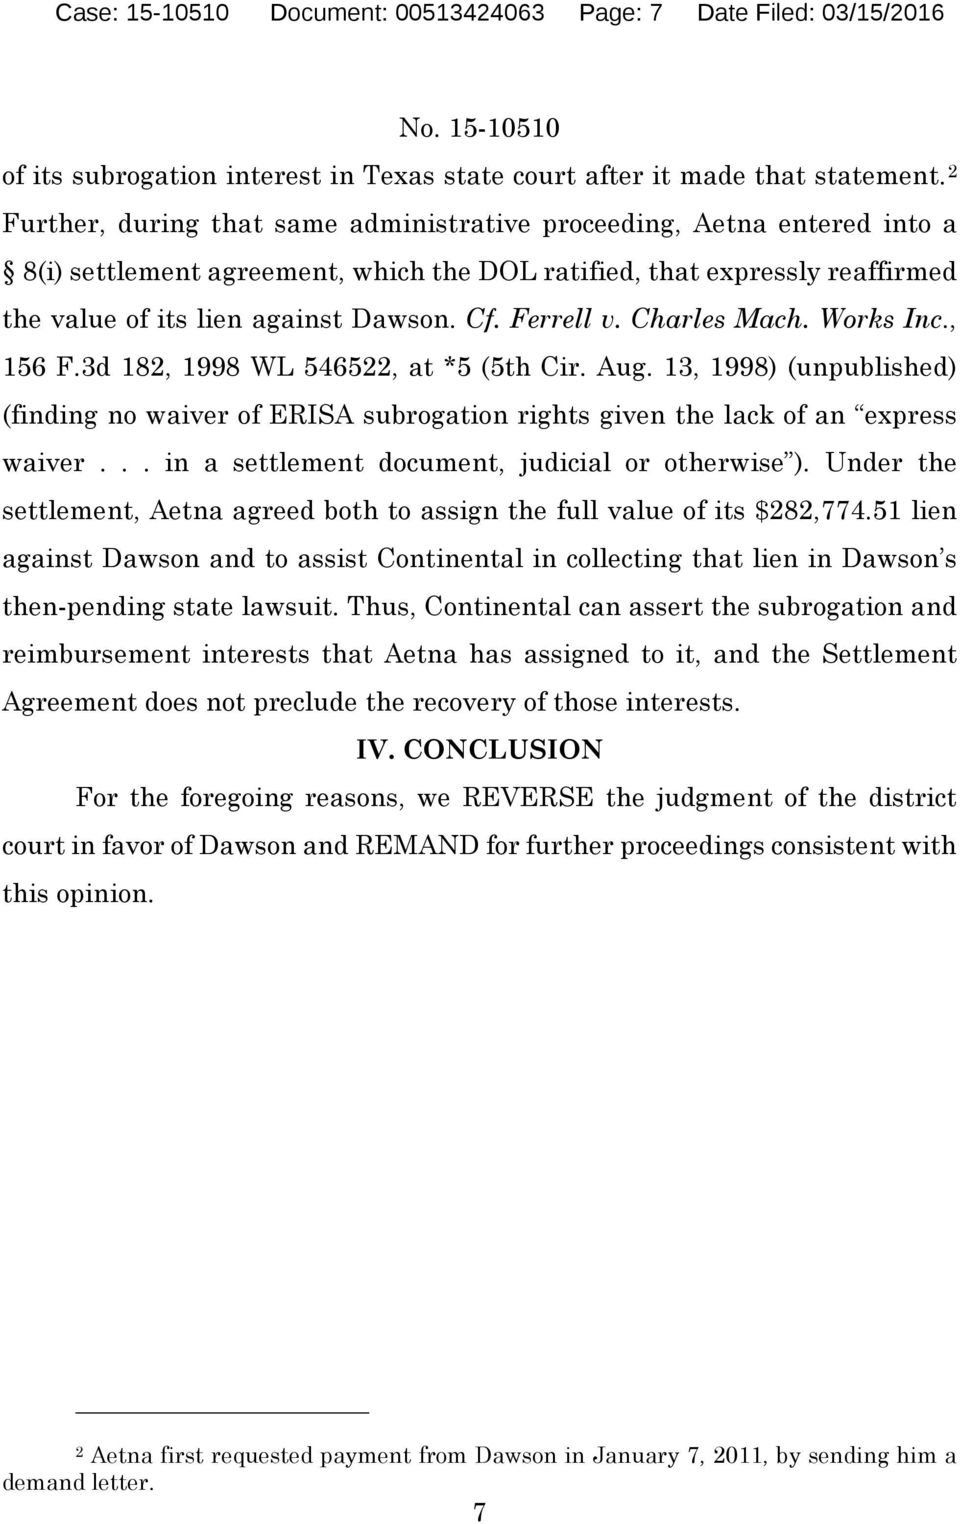 Ferrell v. Charles Mach. Works Inc., 156 F.3d 182, 1998 WL 546522, at *5 (5th Cir. Aug. 13, 1998) (unpublished) (finding no waiver of ERISA subrogation rights given the lack of an express waiver.